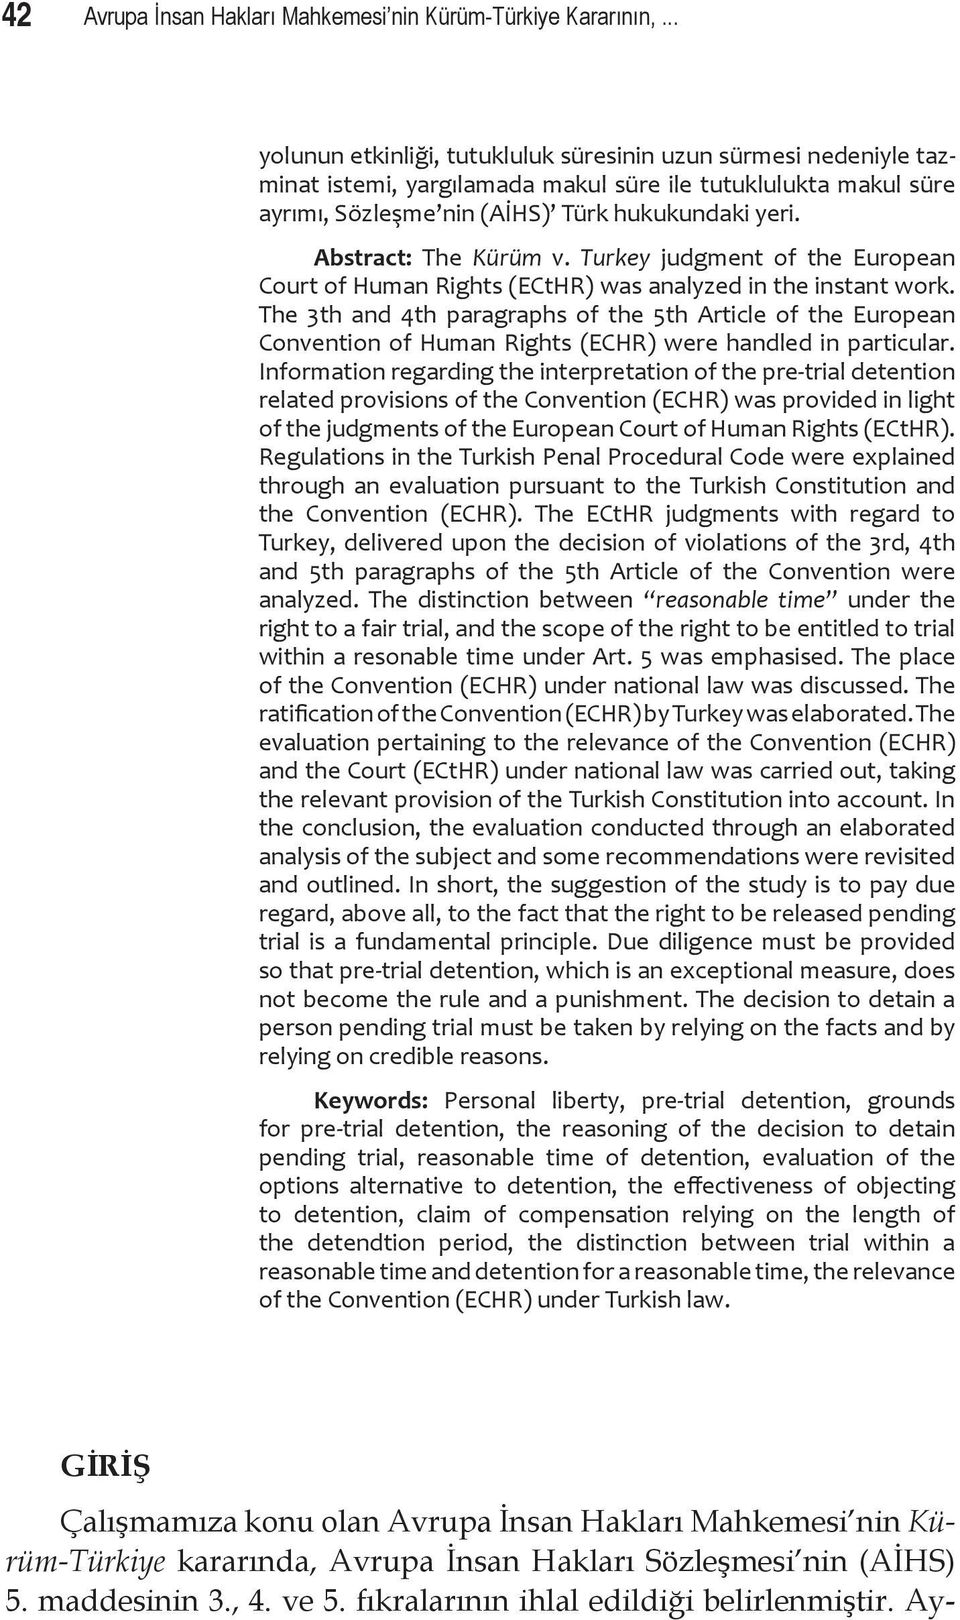 Abstract: The Kürüm v. Turkey judgment of the European Court of Human Rights (ECtHR) was analyzed in the instant work.